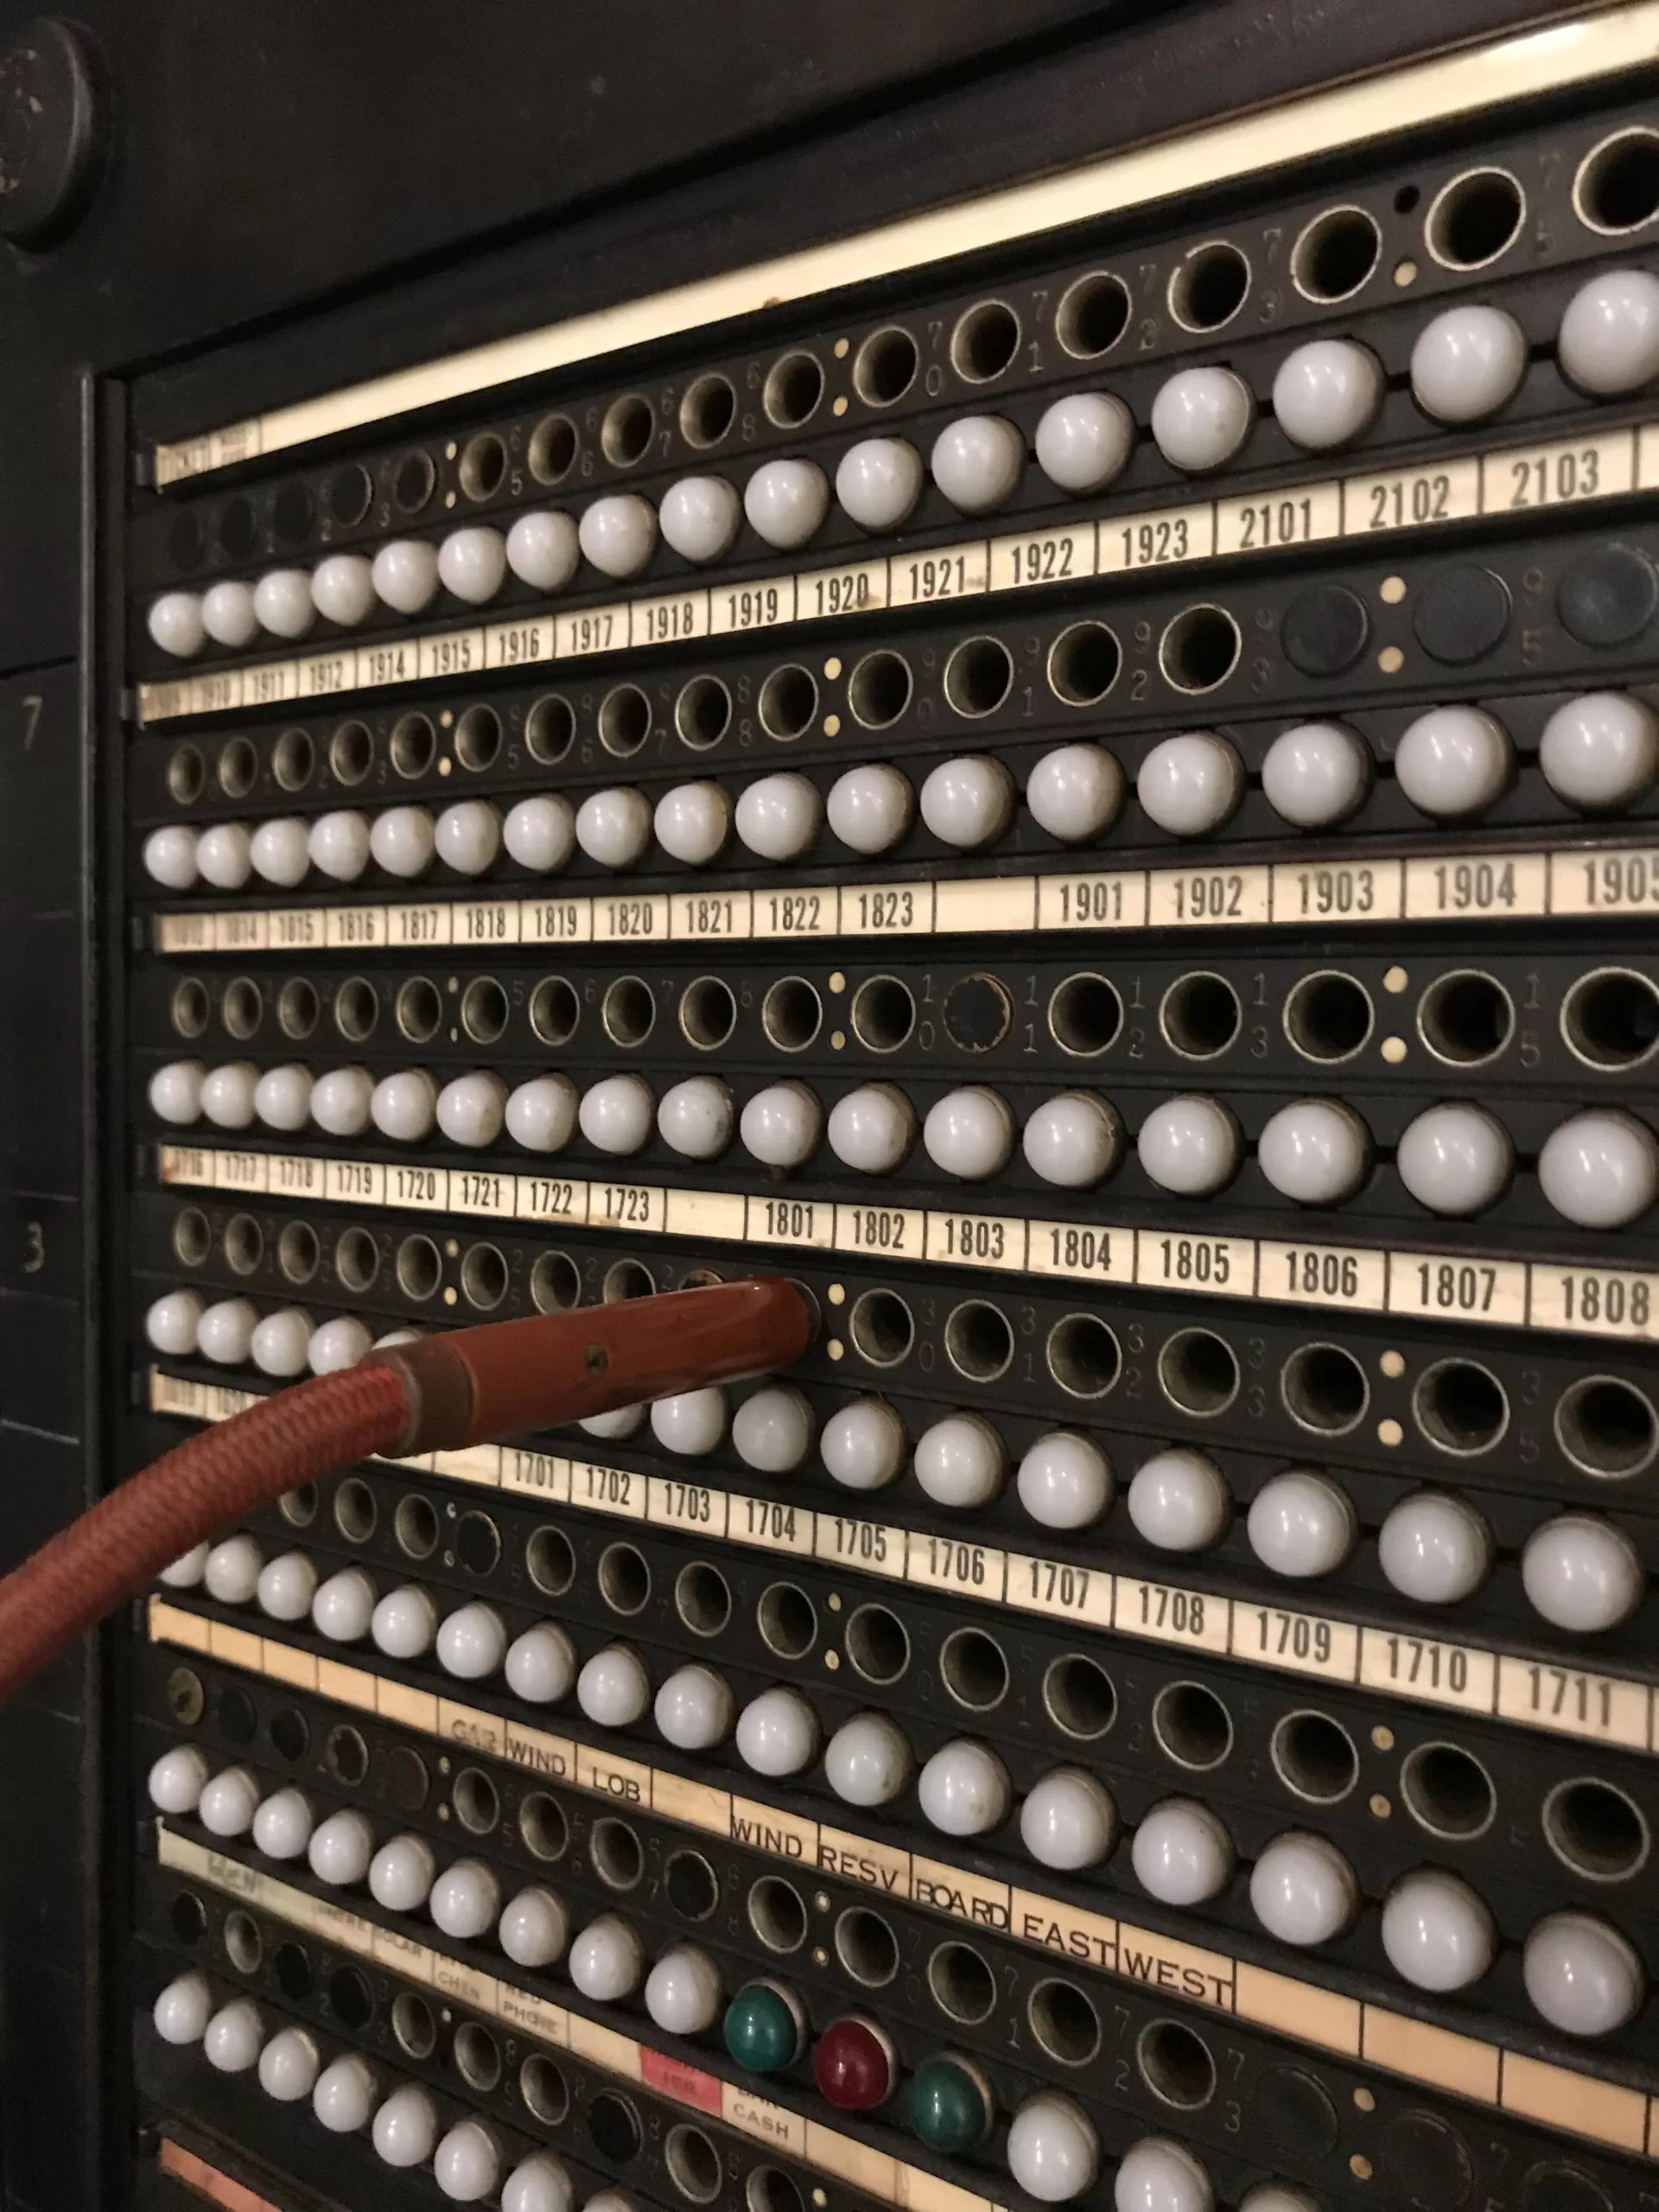 An old-style telephone switchboard which would have been used to connect to telephones on a circuit. A thick cord in the photo was used to connect the calls.